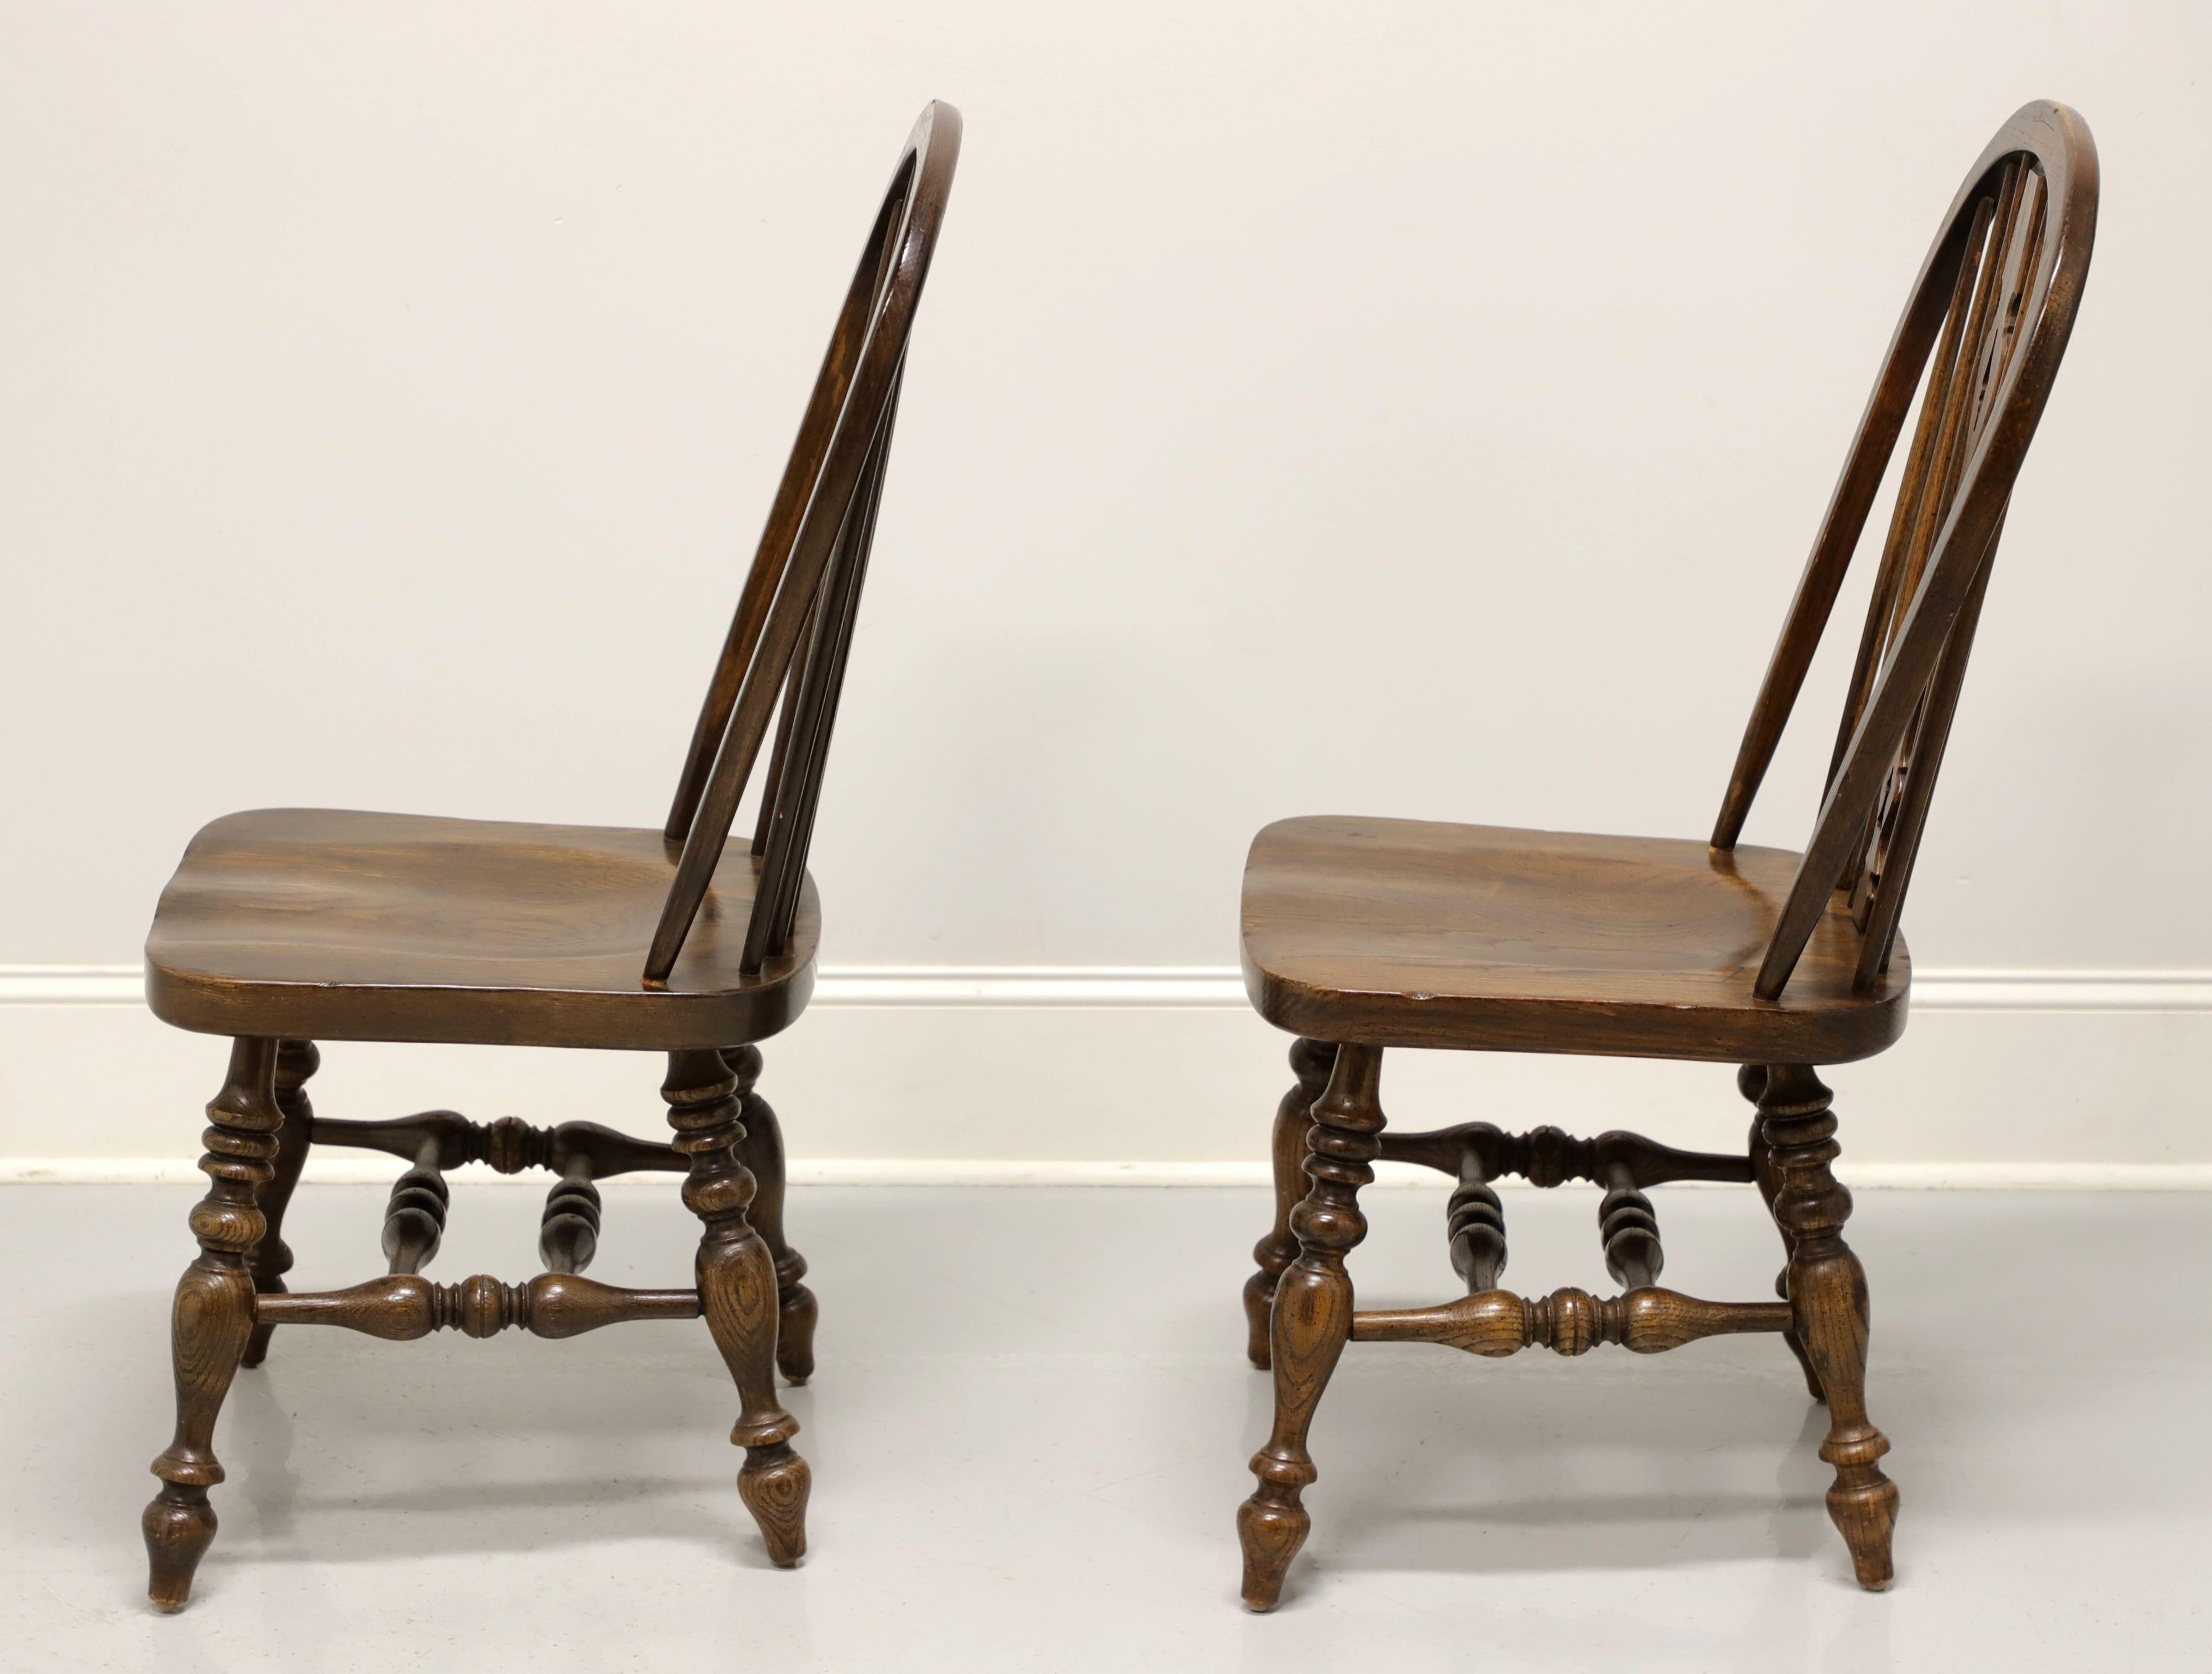 Other ETHAN ALLEN Royal Charter Oak Bowback Windsor Dining Side Chairs - Pair A